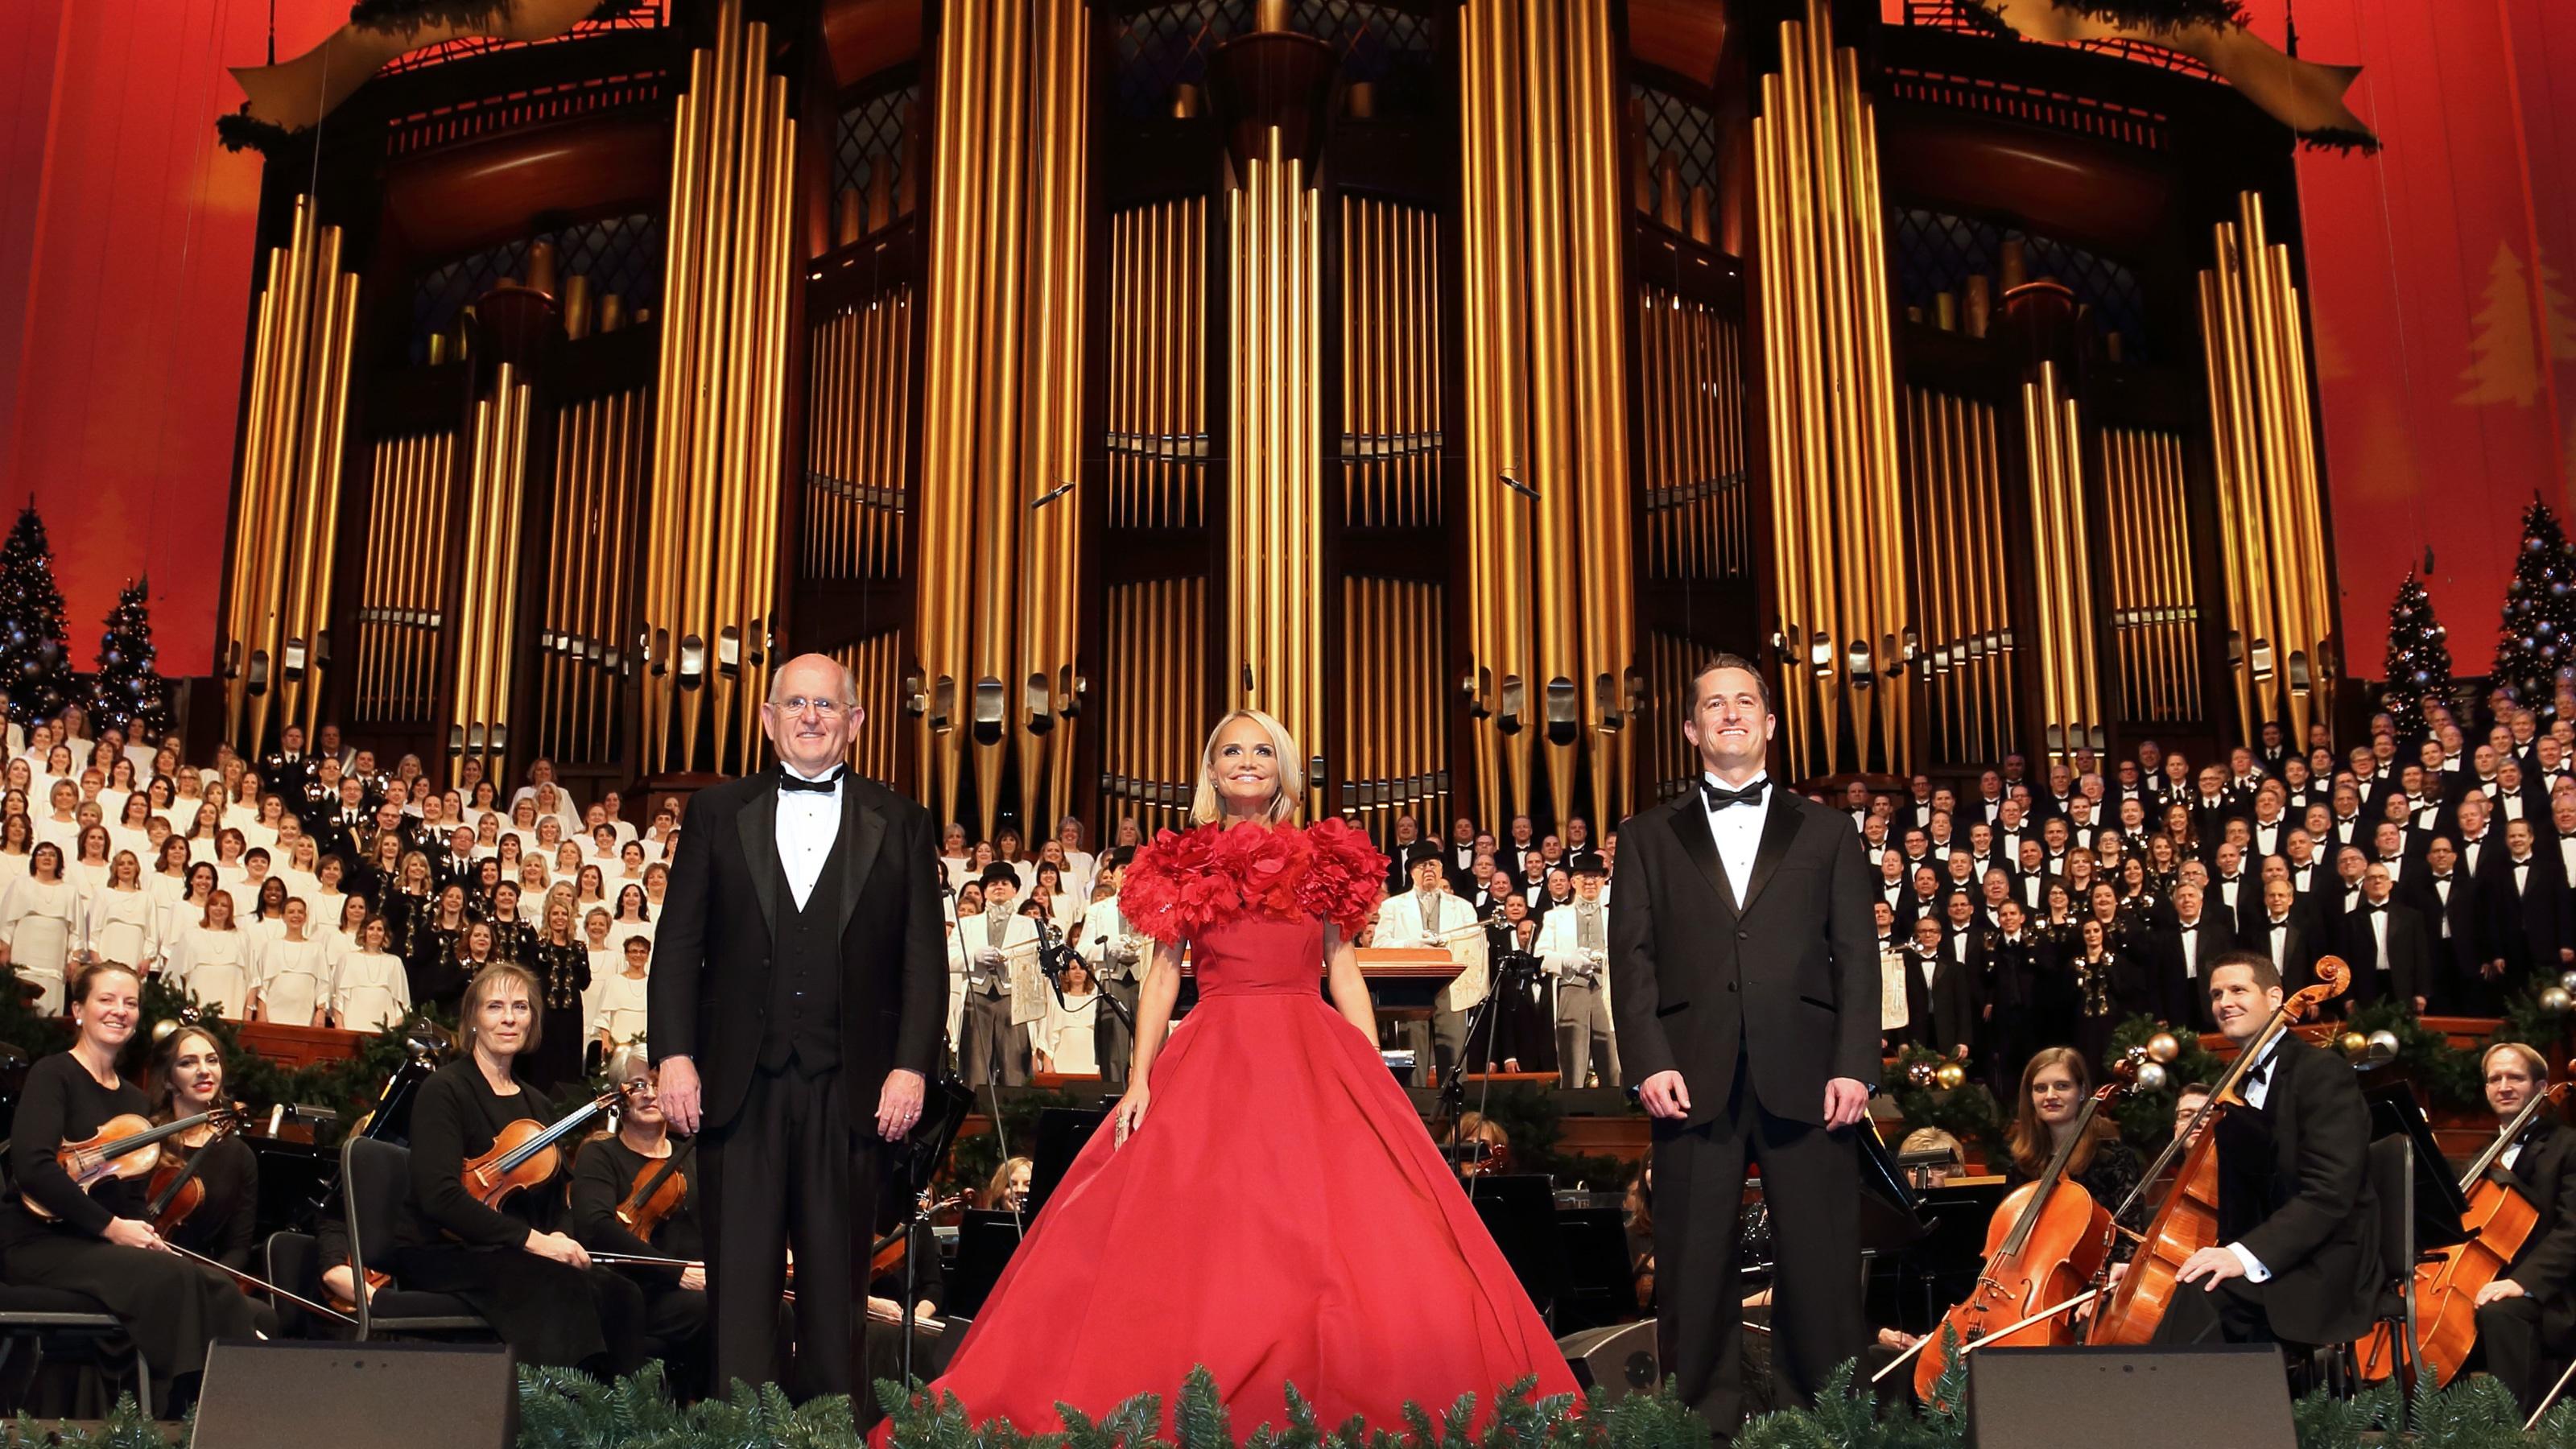 Mack Wilberg, Kristin Chenoweth and Ryan Murphy stand center stage with The Orchestra at Temple Square and The Tabernacle Choir behind them.